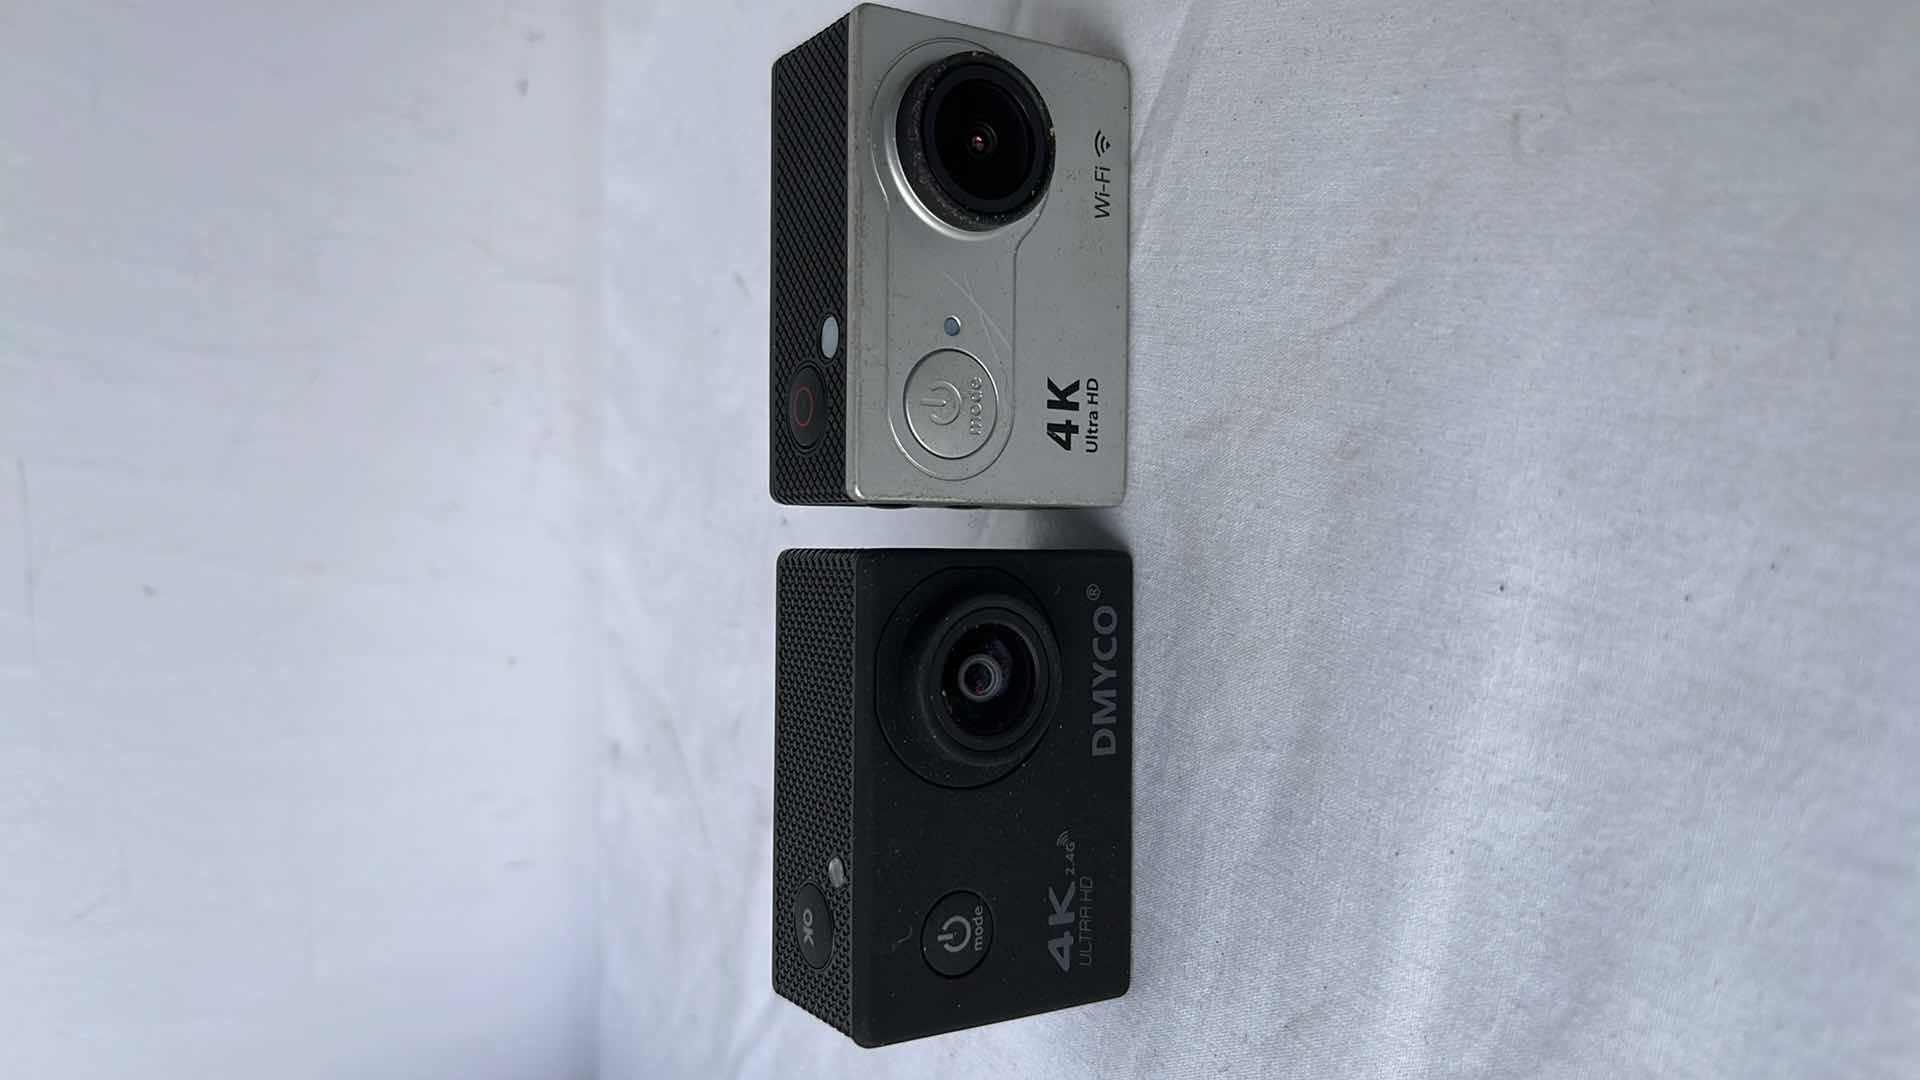 Photo 2 of DYMCO 4K ULTRA HD ACTION CAMERA (MODEL AC-F60R) & v4.0 4K ULTRA HD ACTION CAMERA INCLUDES CASE WITH ACCESSORIES